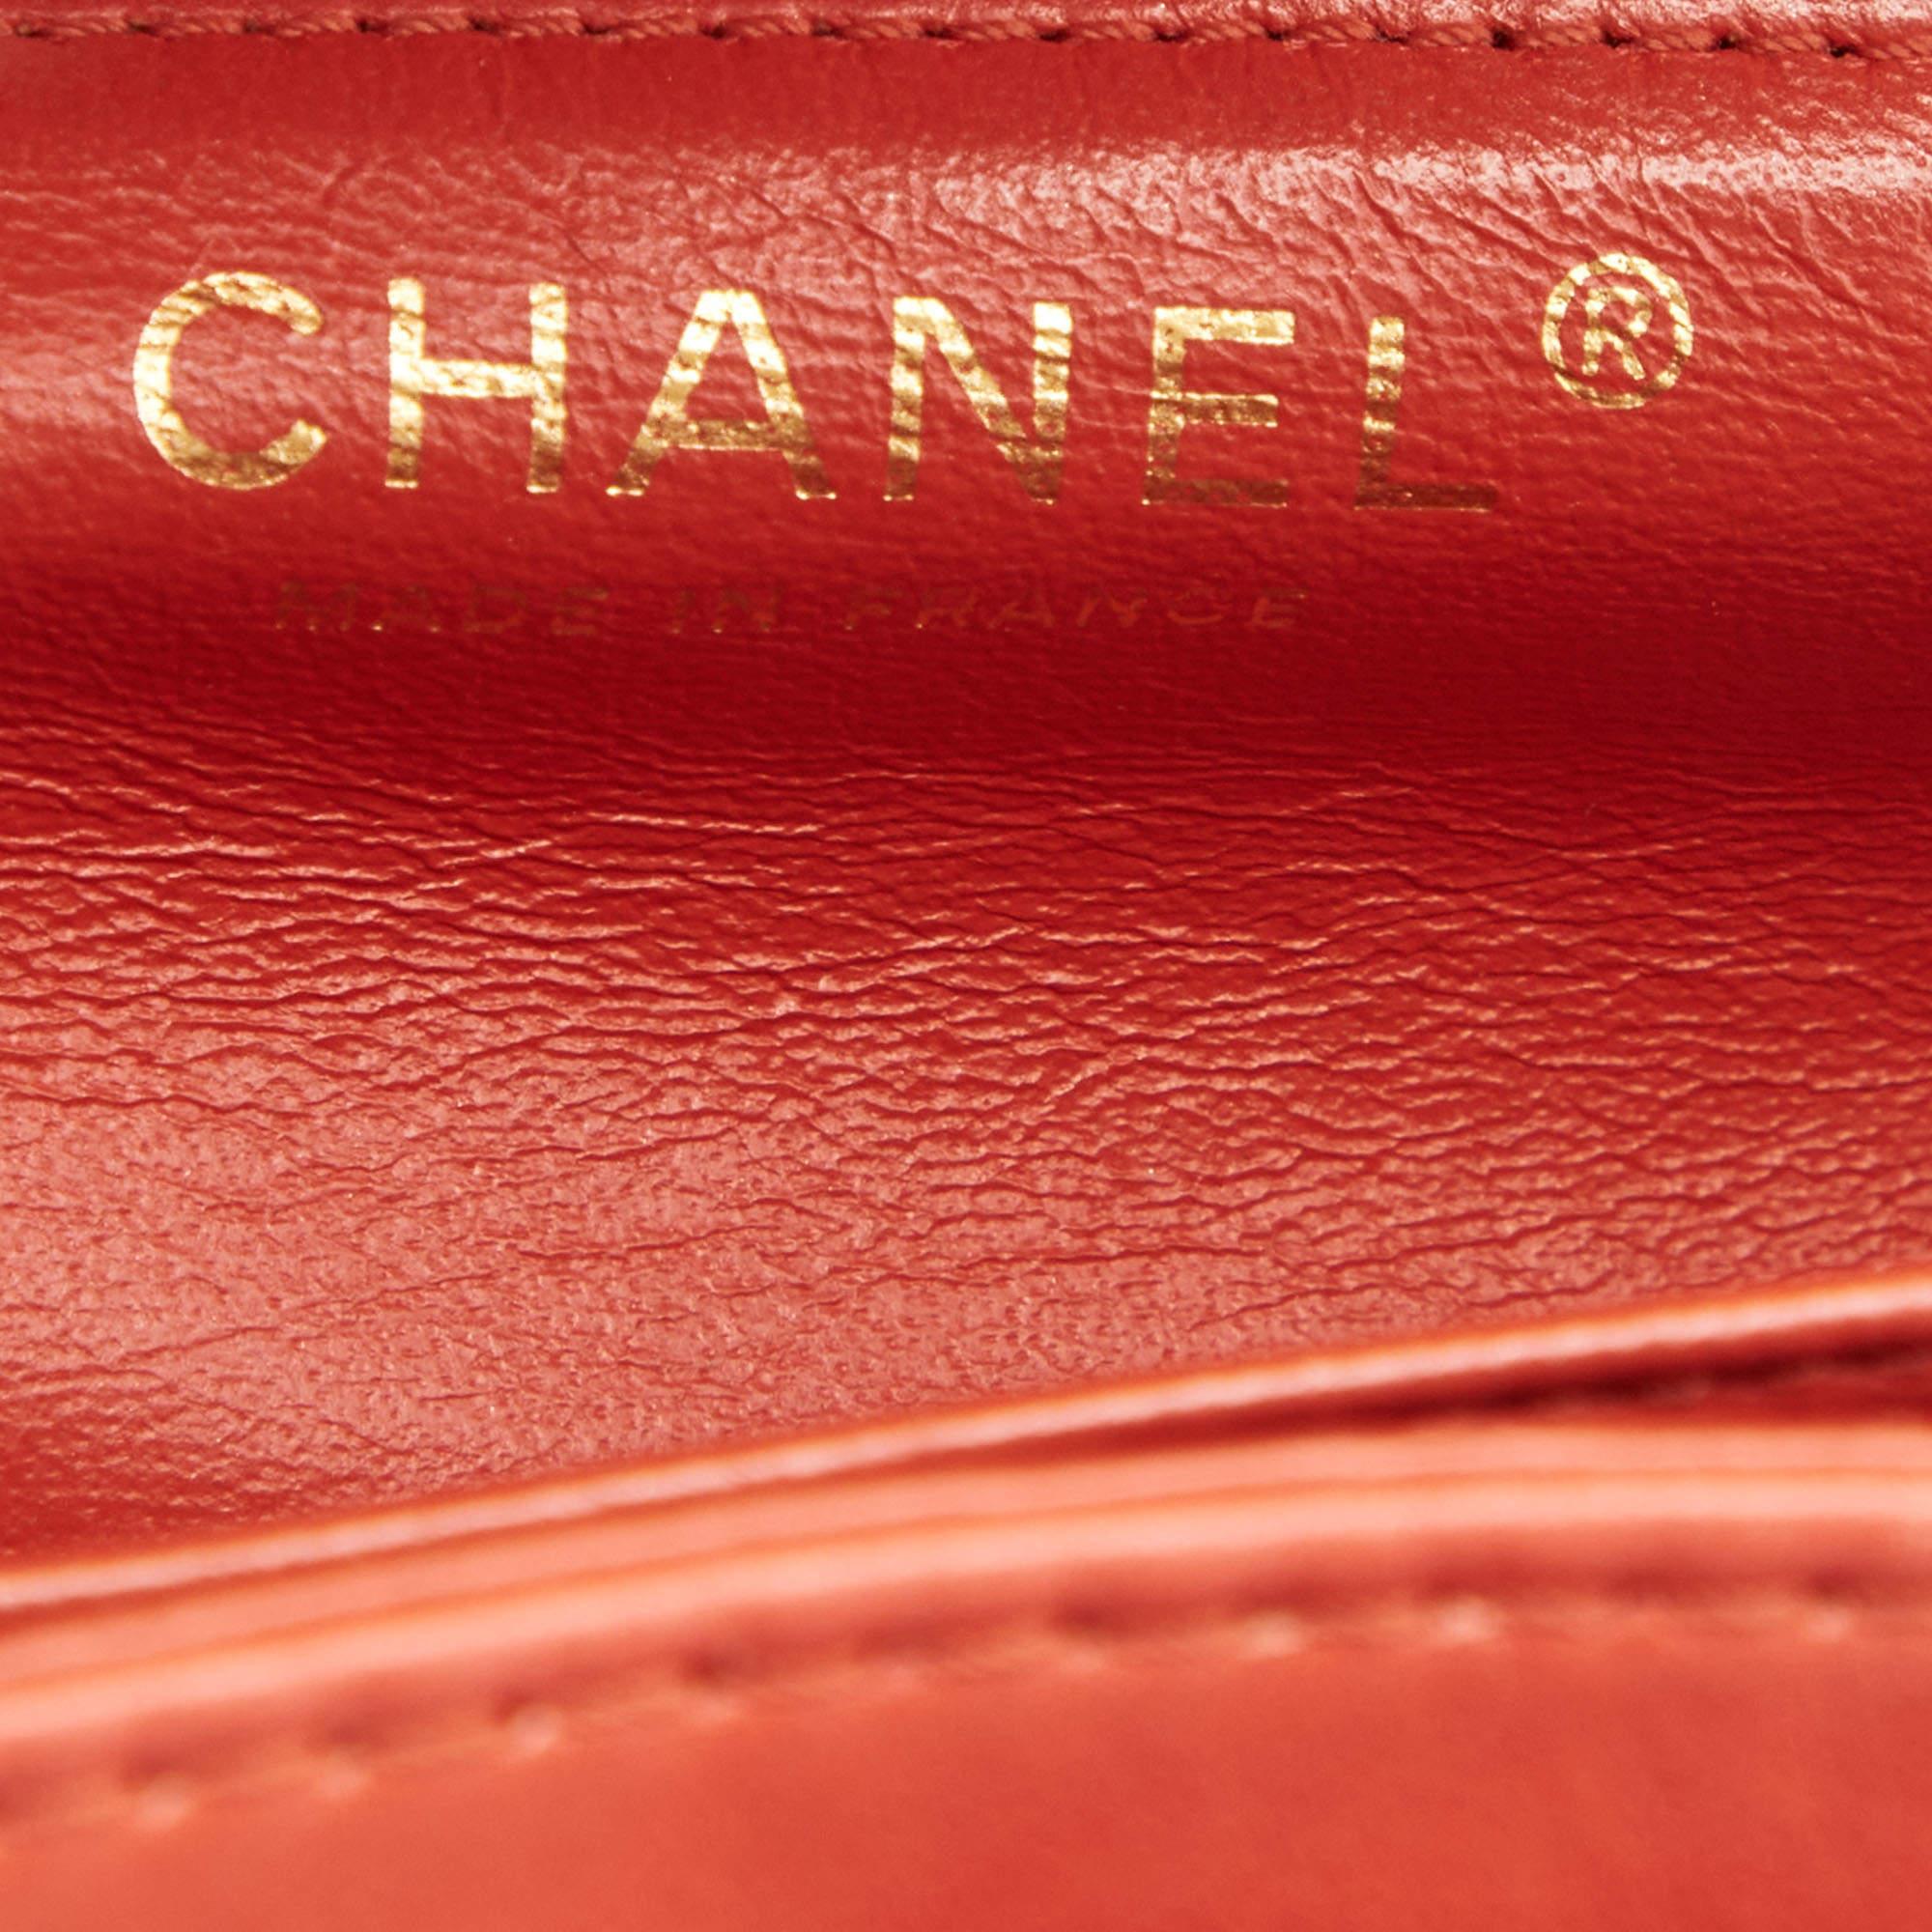 Chanel Red Patent Leather Reissue Double Compartment Flap Bag 7